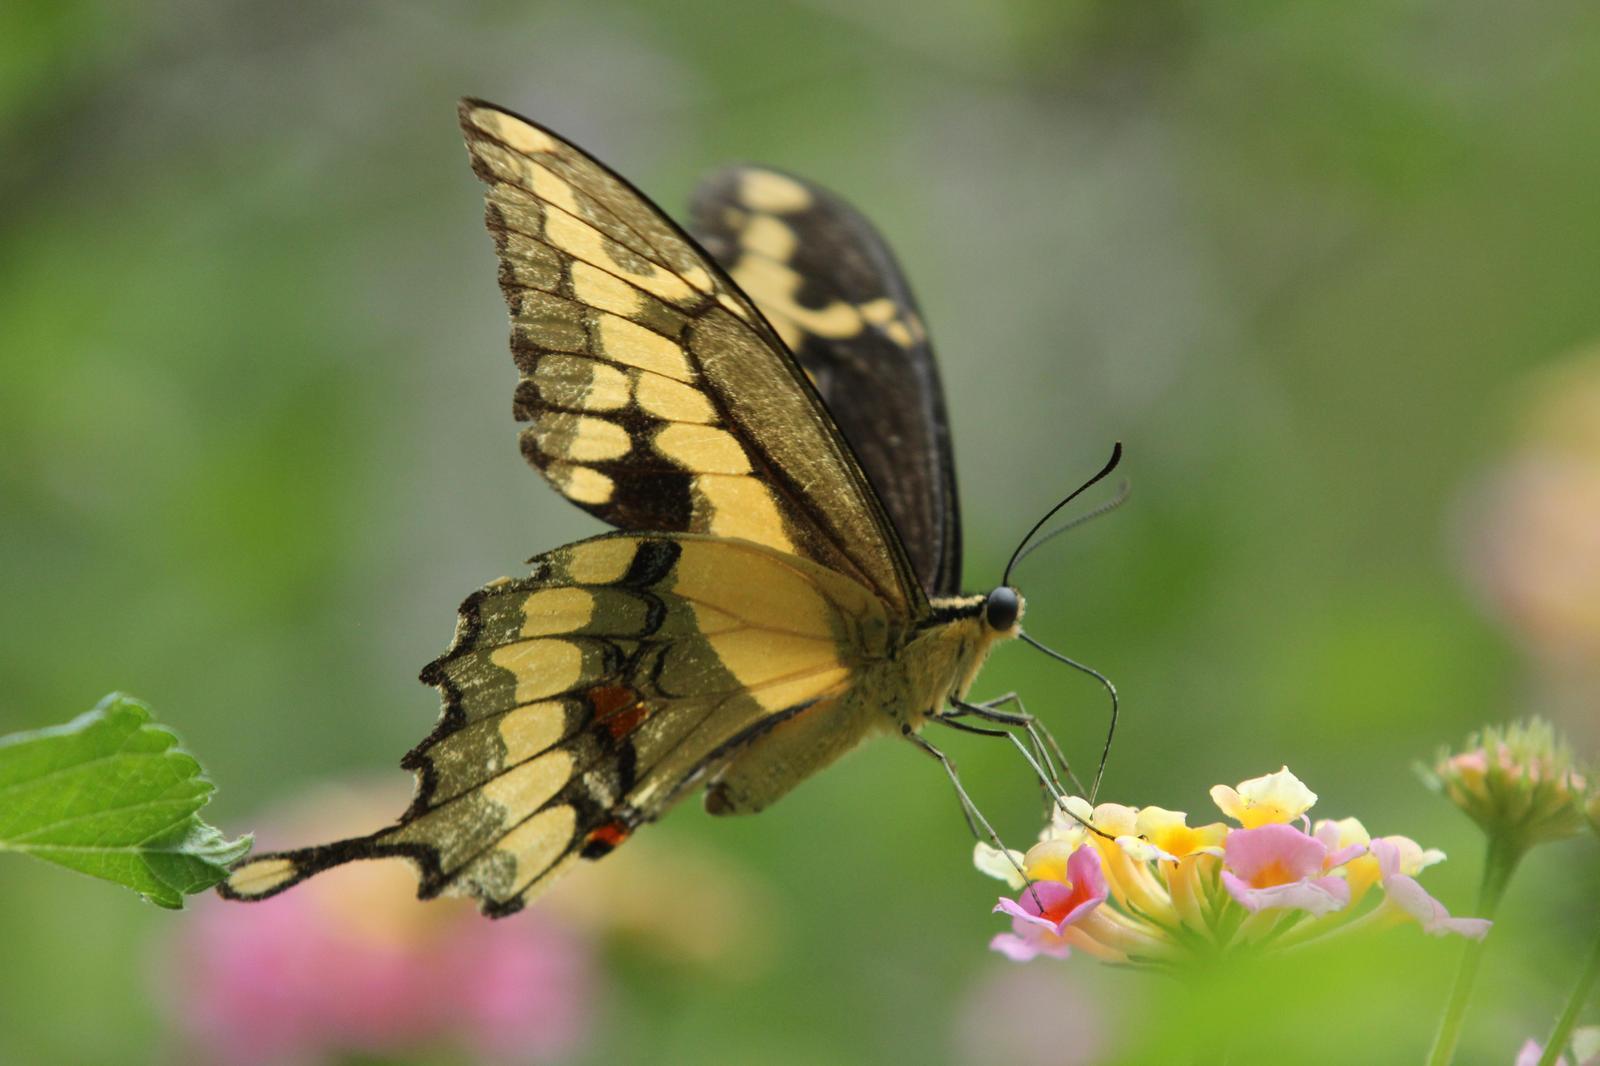 Giant Swallowtail Photo by Kristy Baker